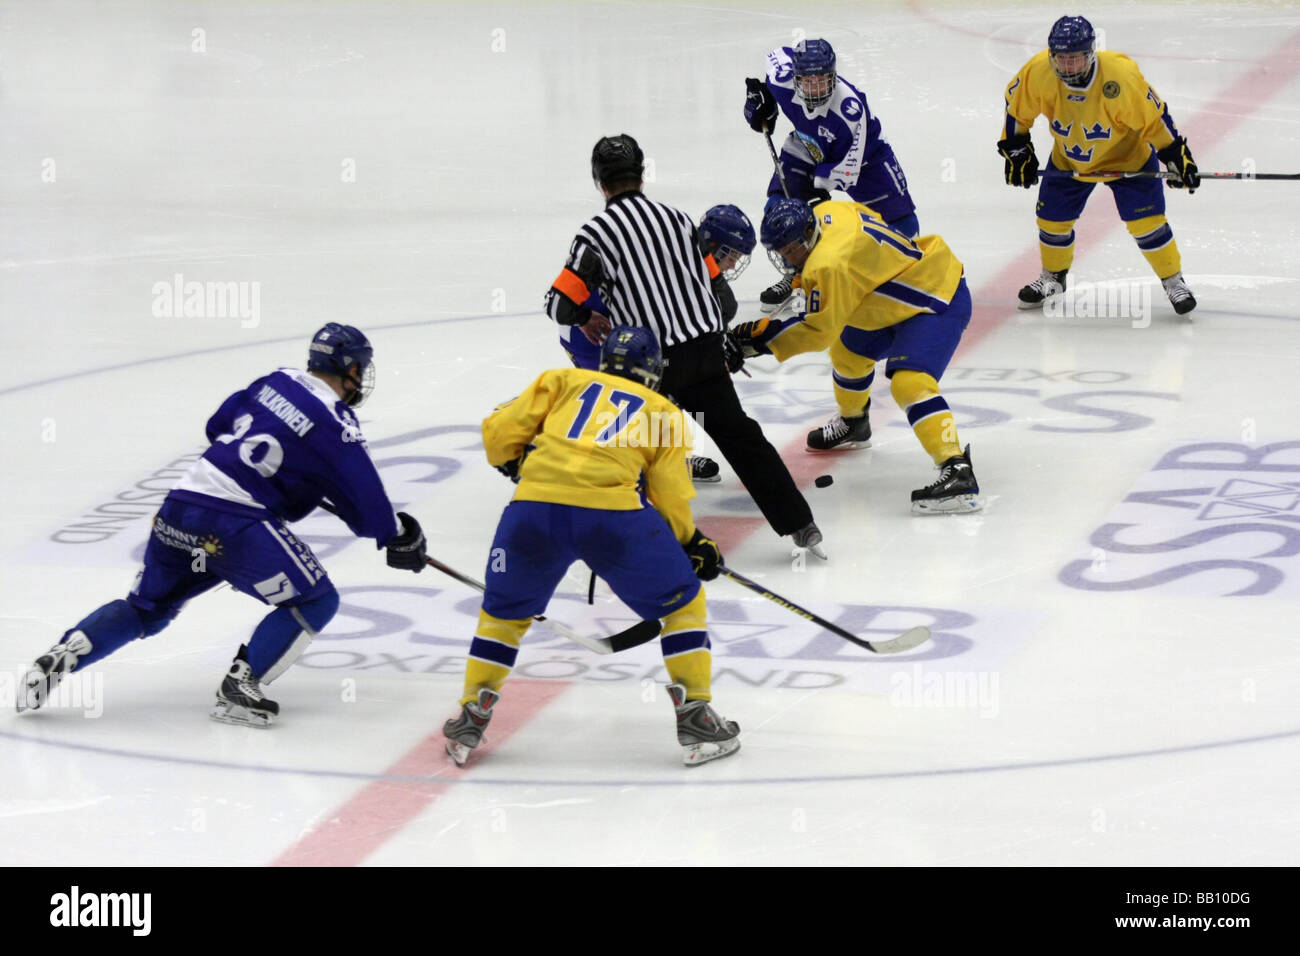 Face-off in a U18 ice-hockey tournament between Sweden and Finland. Stock Photo